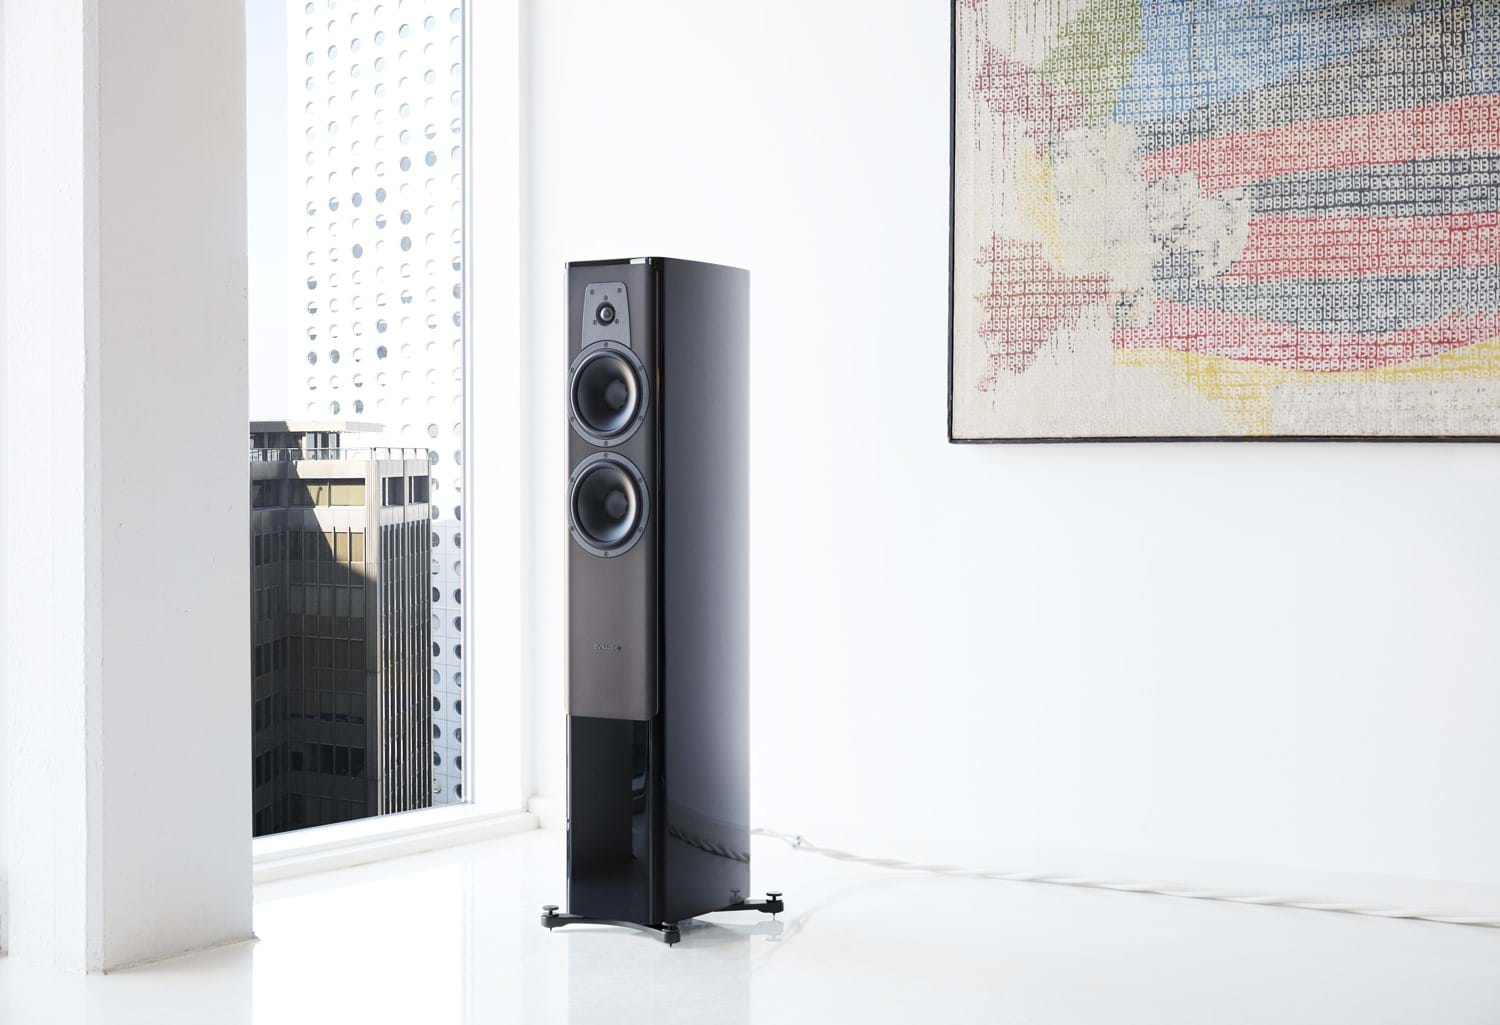 Contour 30 review - Outstanding sound performance and design